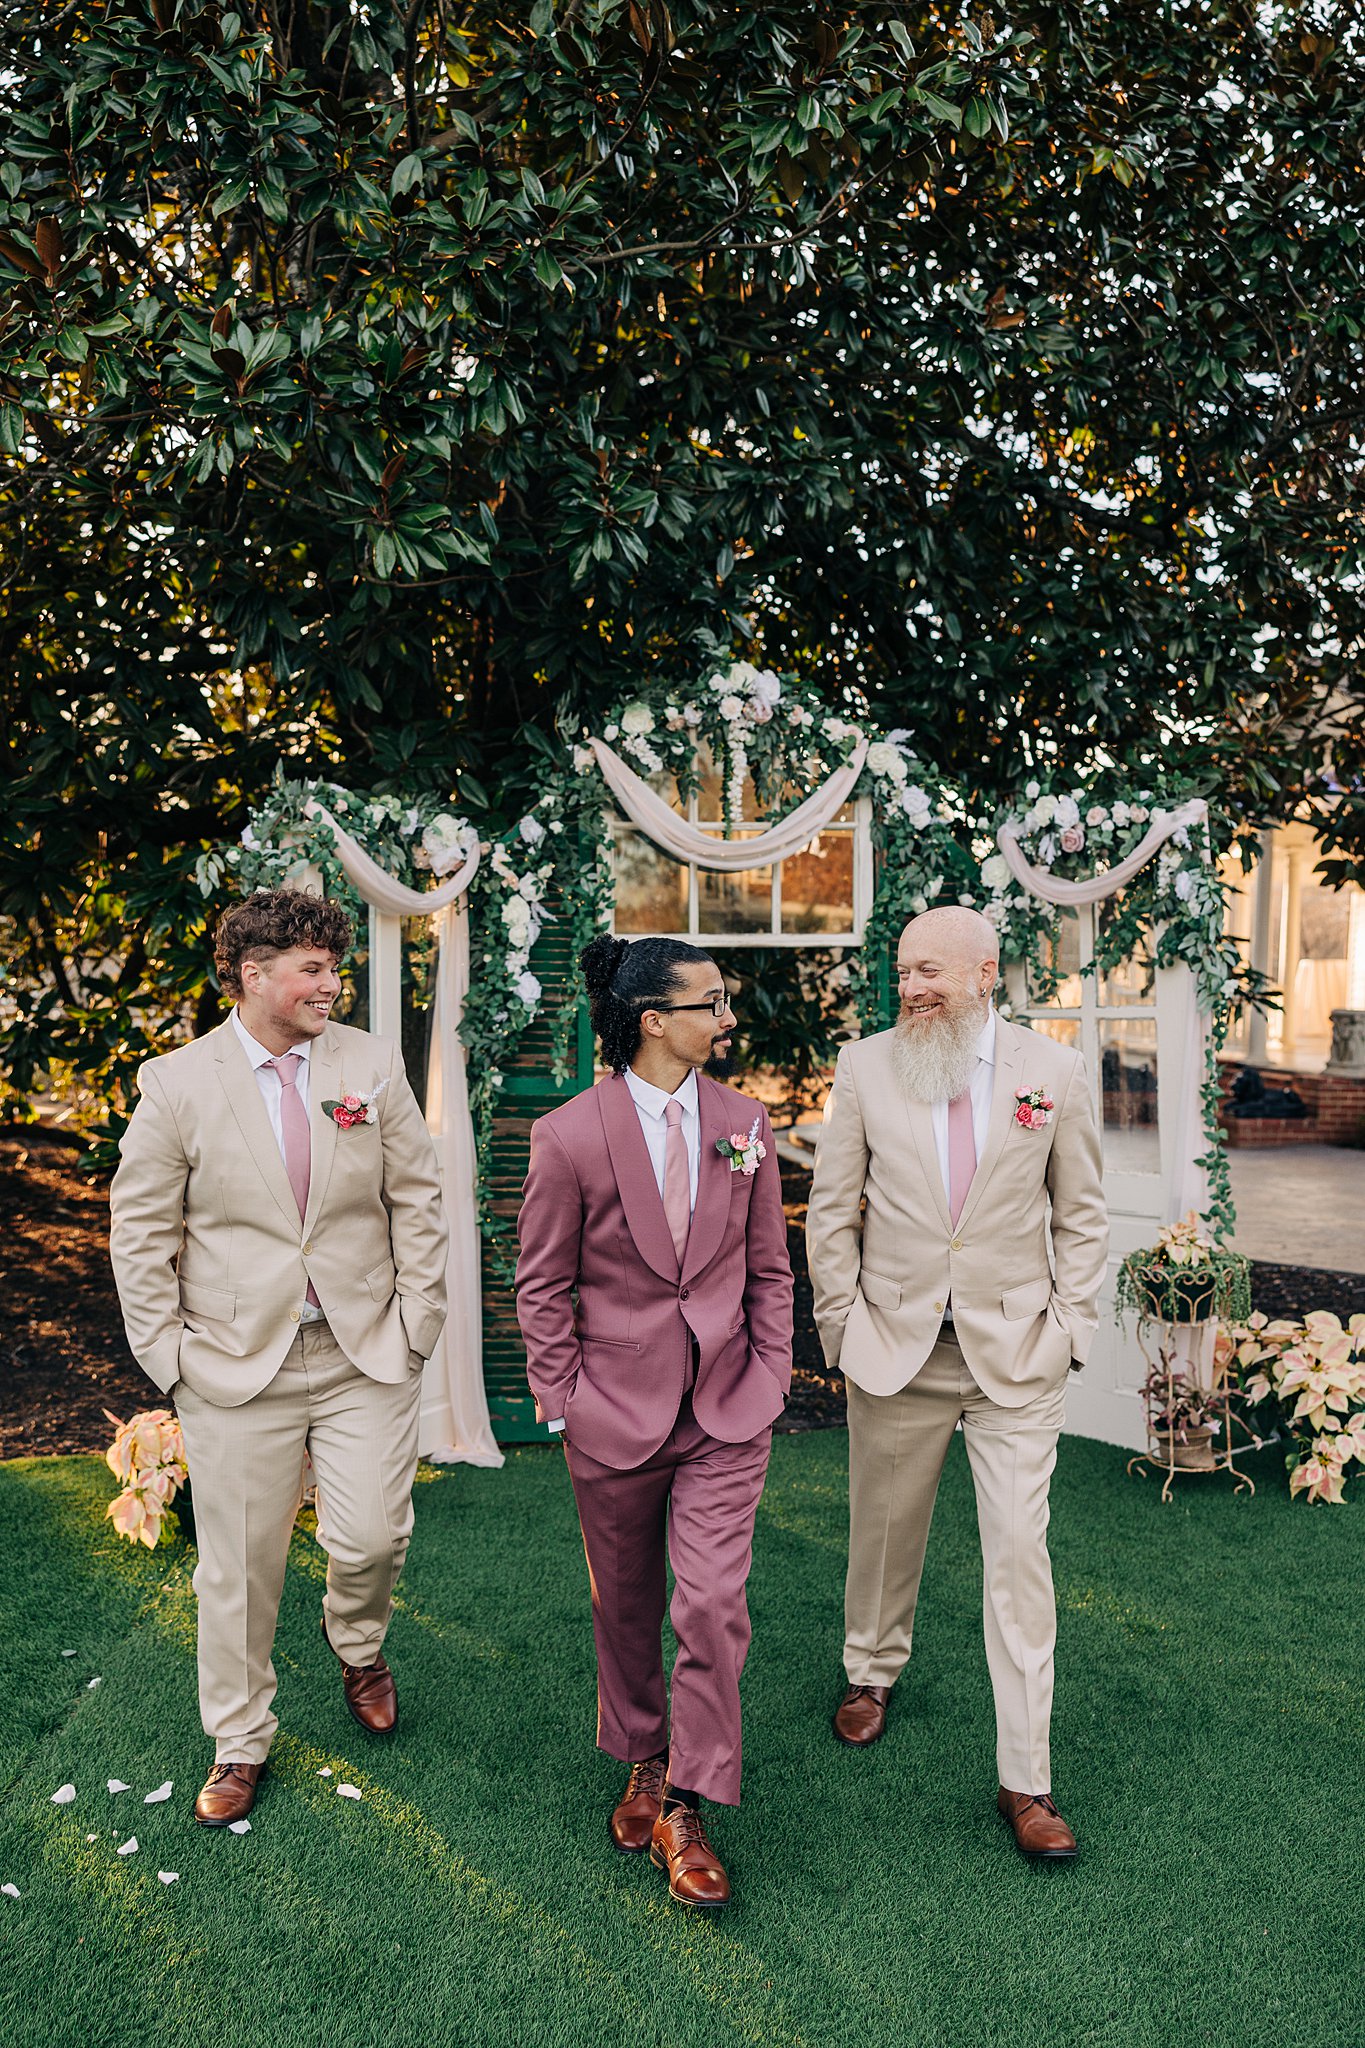 A groom in a pin suit walks in a garden with hands in his pockets with his groomsmen